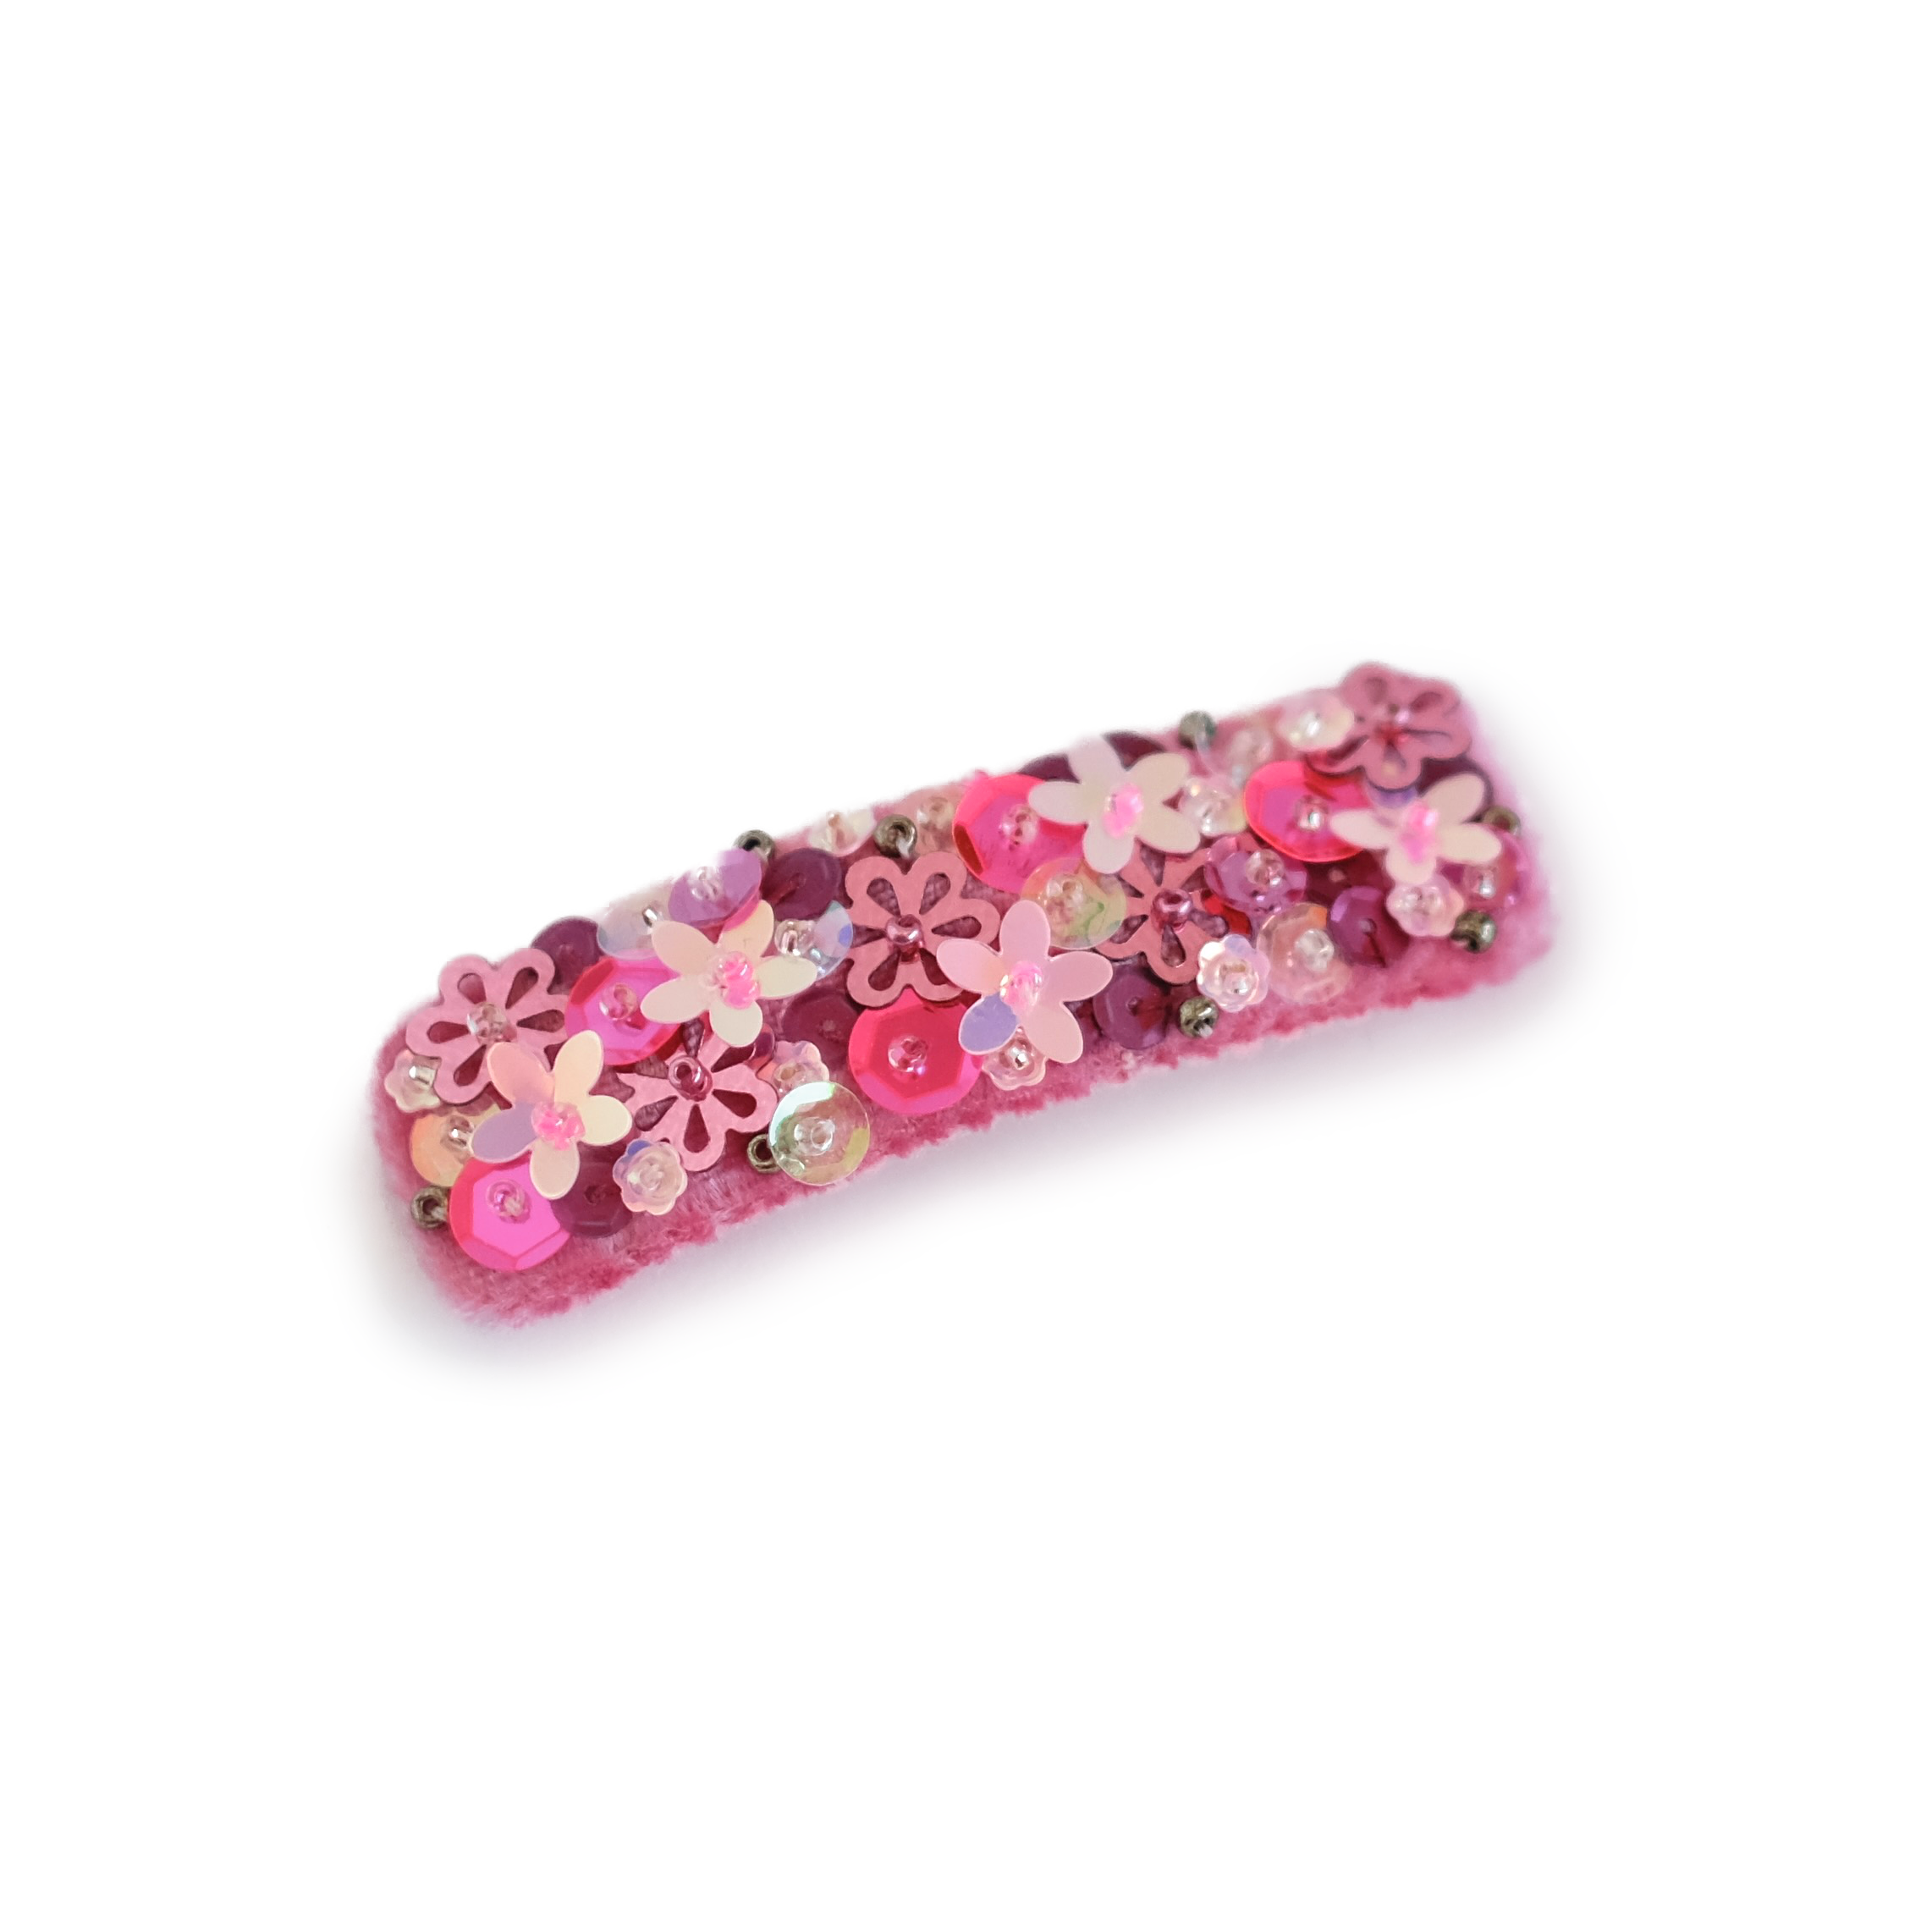 Large rectangular snap hair clip with sequins in bright and neon pink colors.